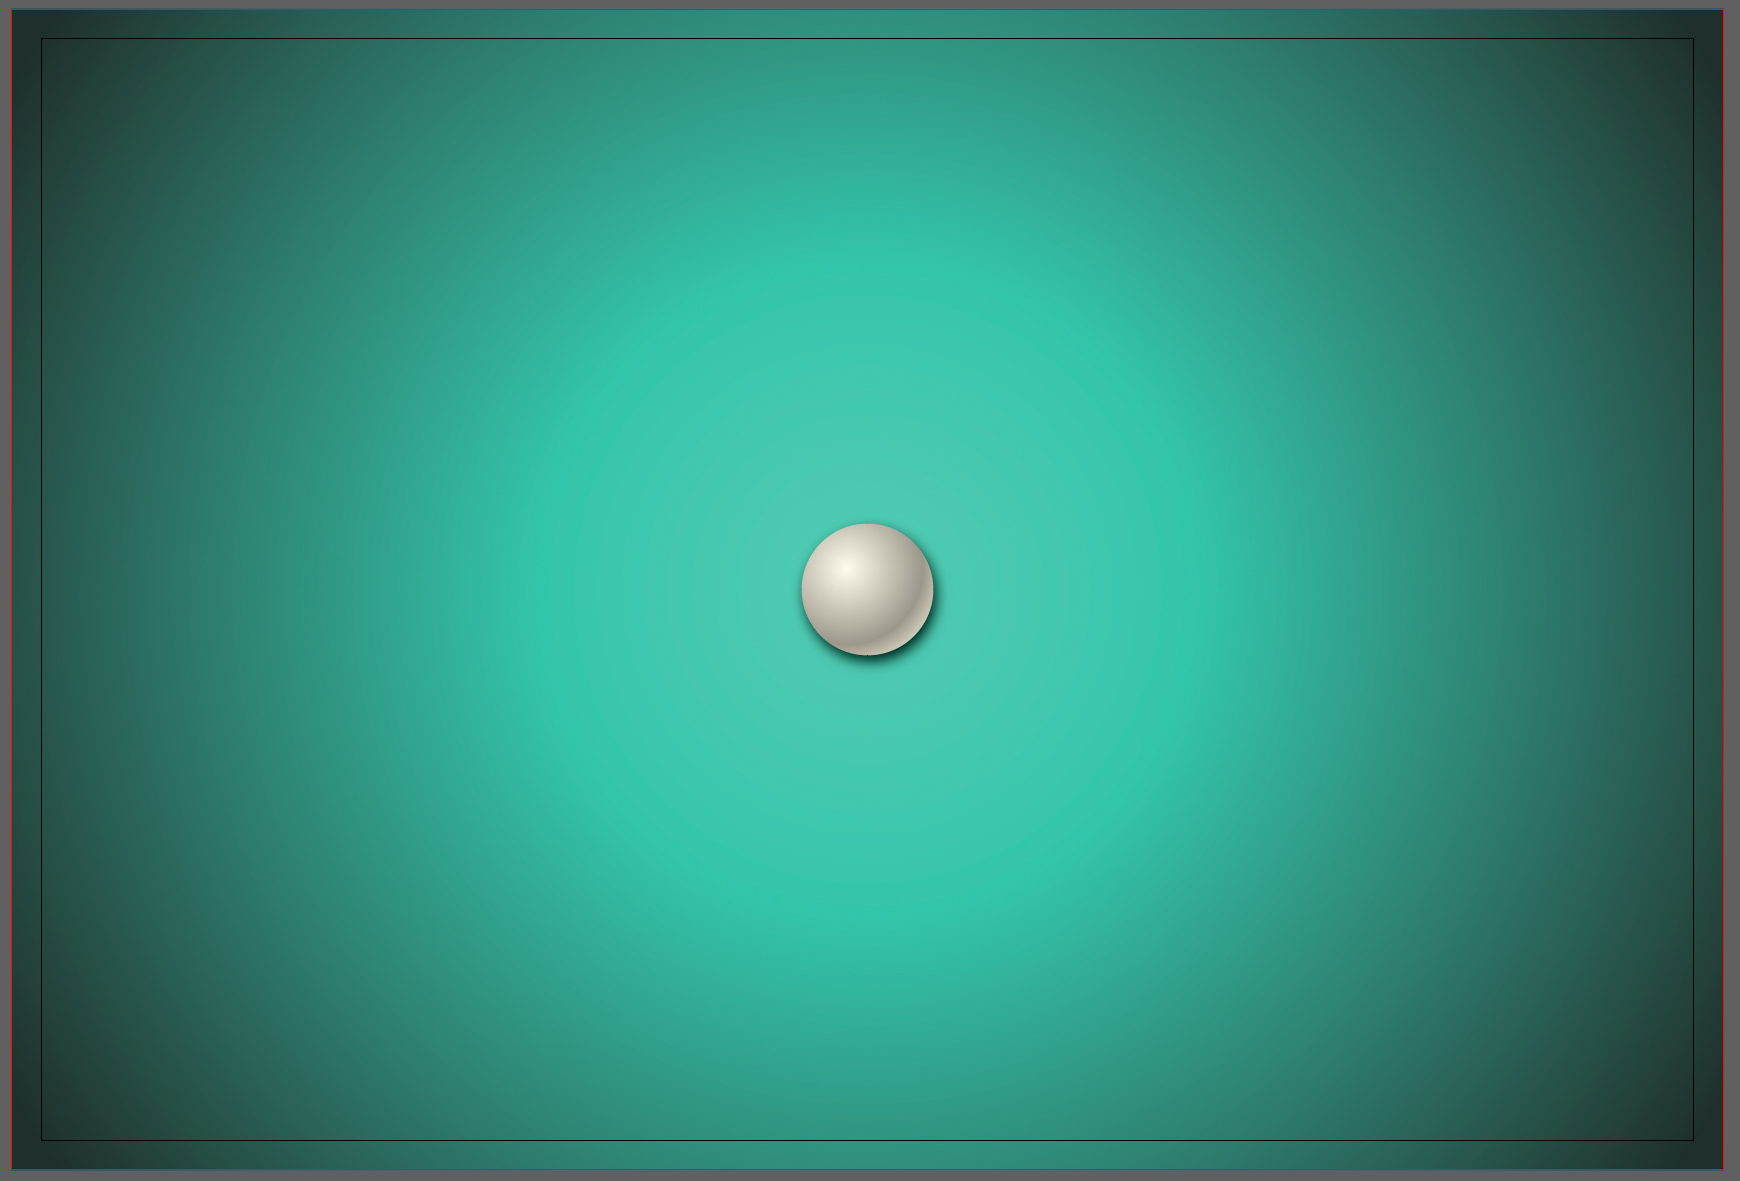 White cue ball on a gradient green field in Adobe Illustrator